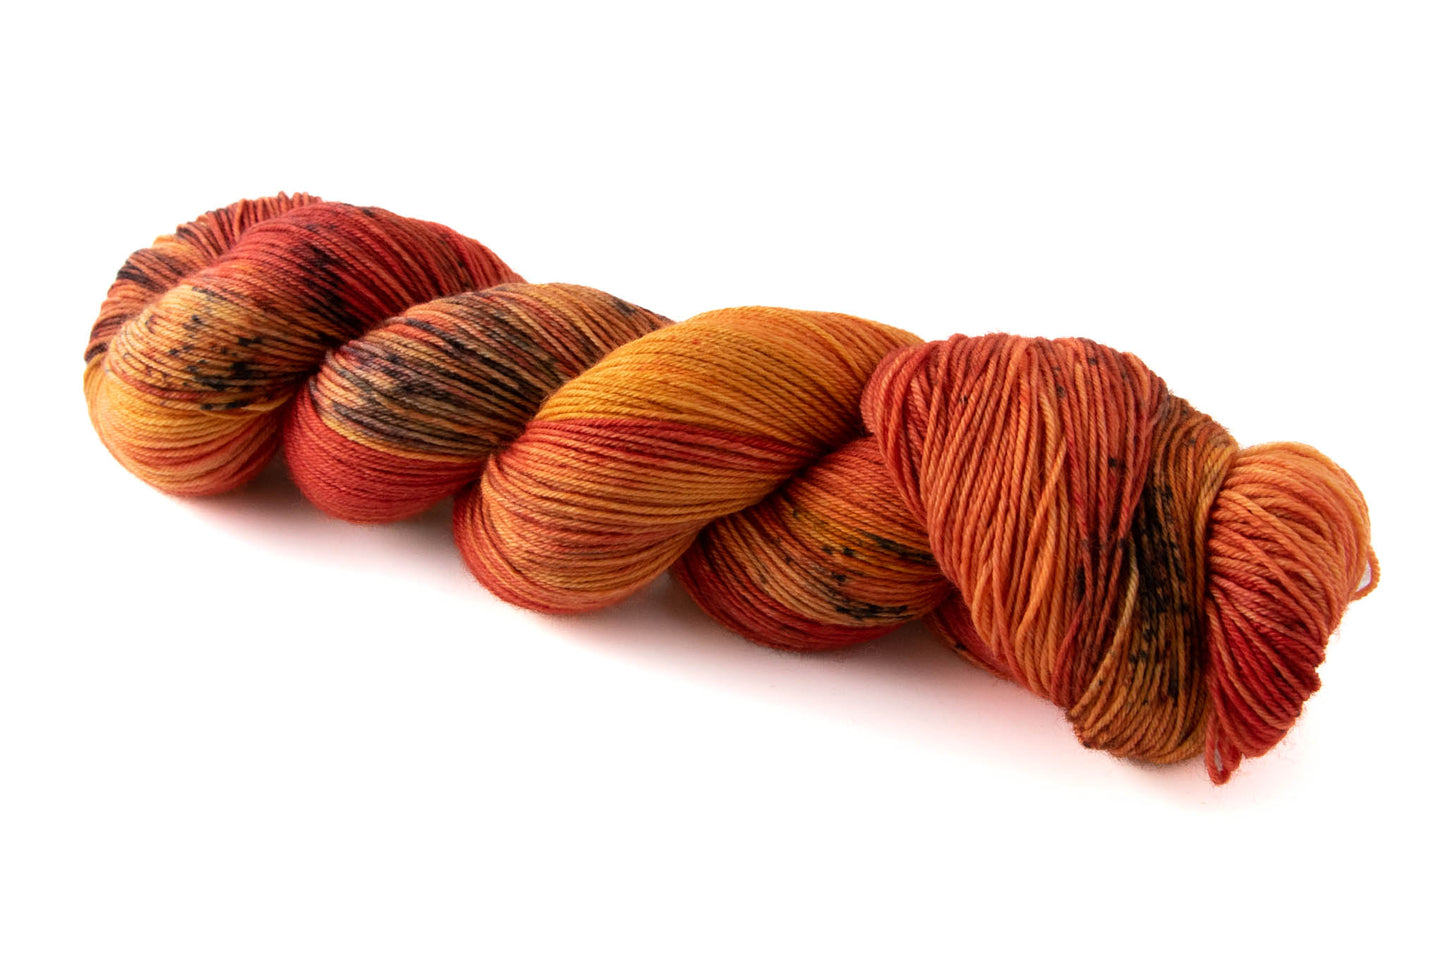 A skein of saturated red and orange variegated hand-dyed wool yarn with black speckles.